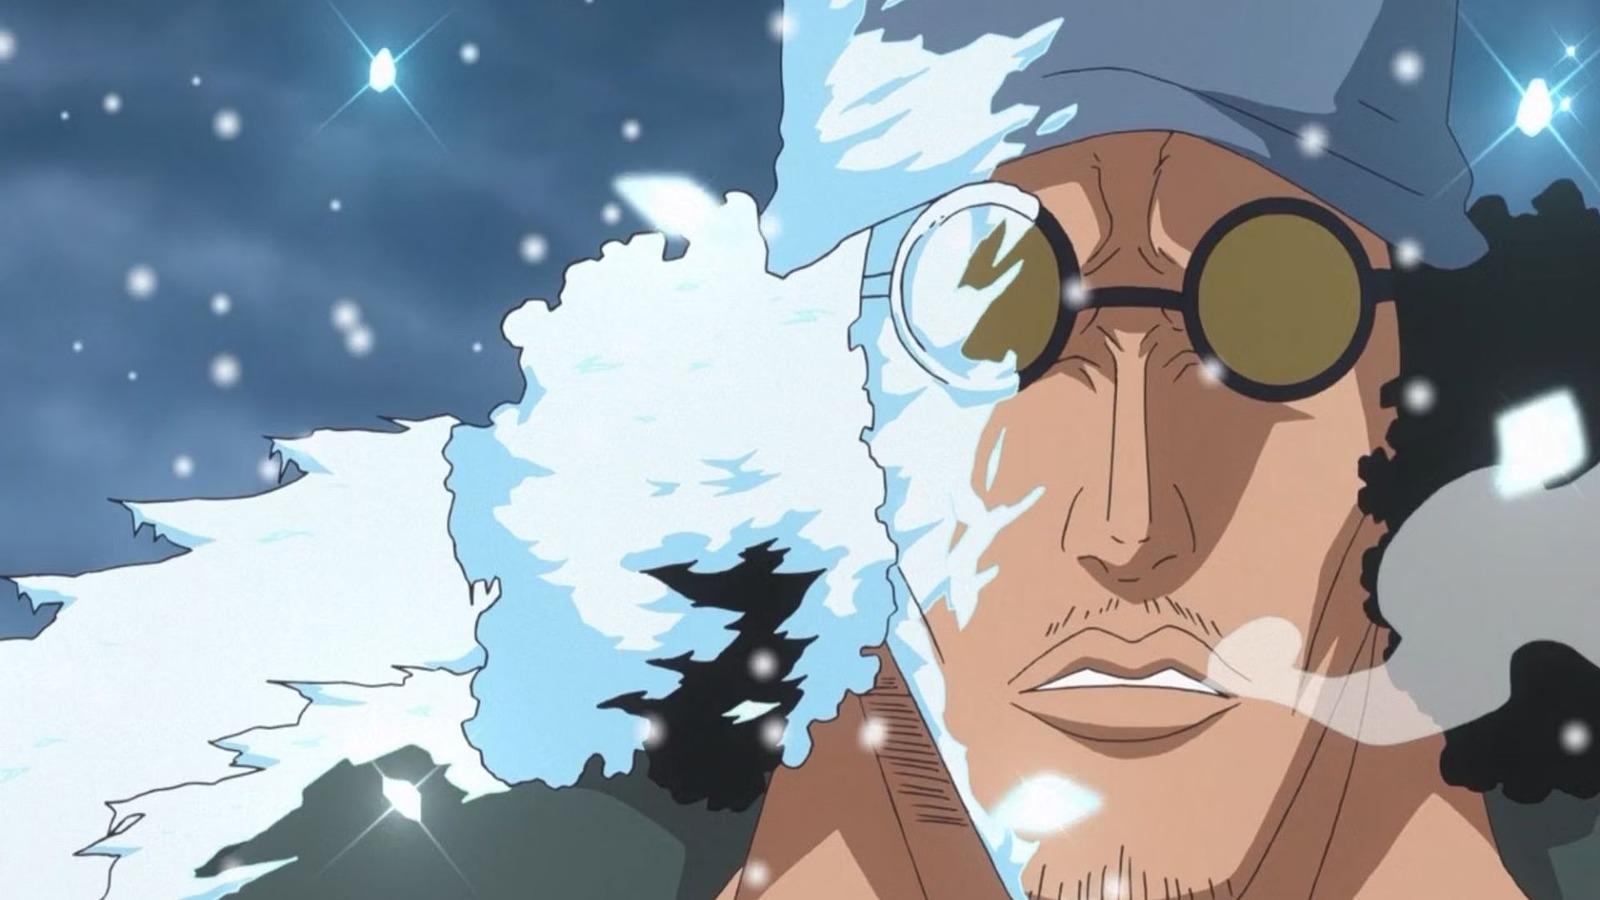 An image of former admiral Kuzan from One Piece